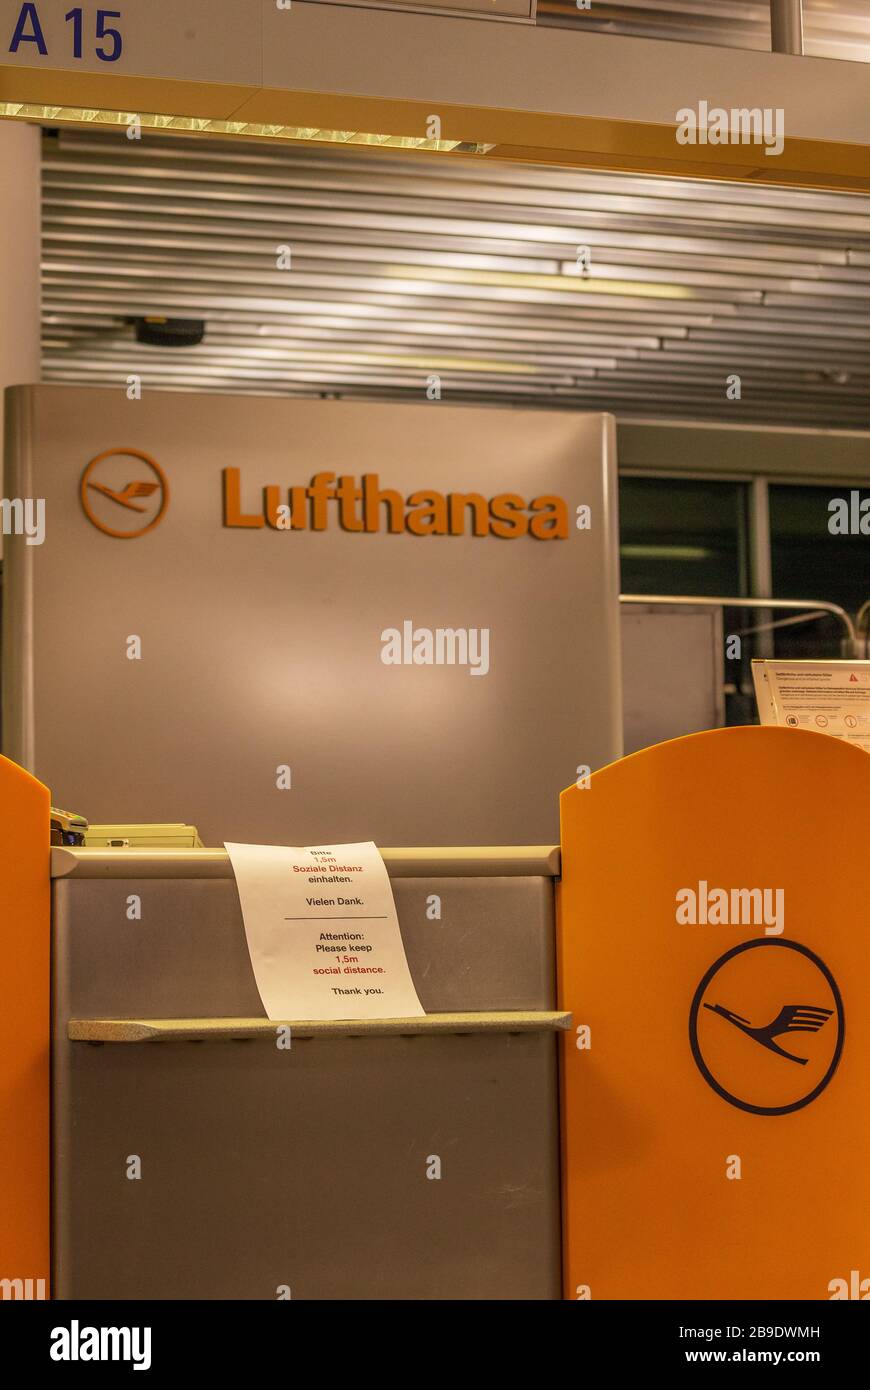 Frankfurt Airport, Germany - March 23, 2020: Sign at a Lufthansa check-in counter reading 'Please keep 1,5m social distance' in German and English Stock Photo